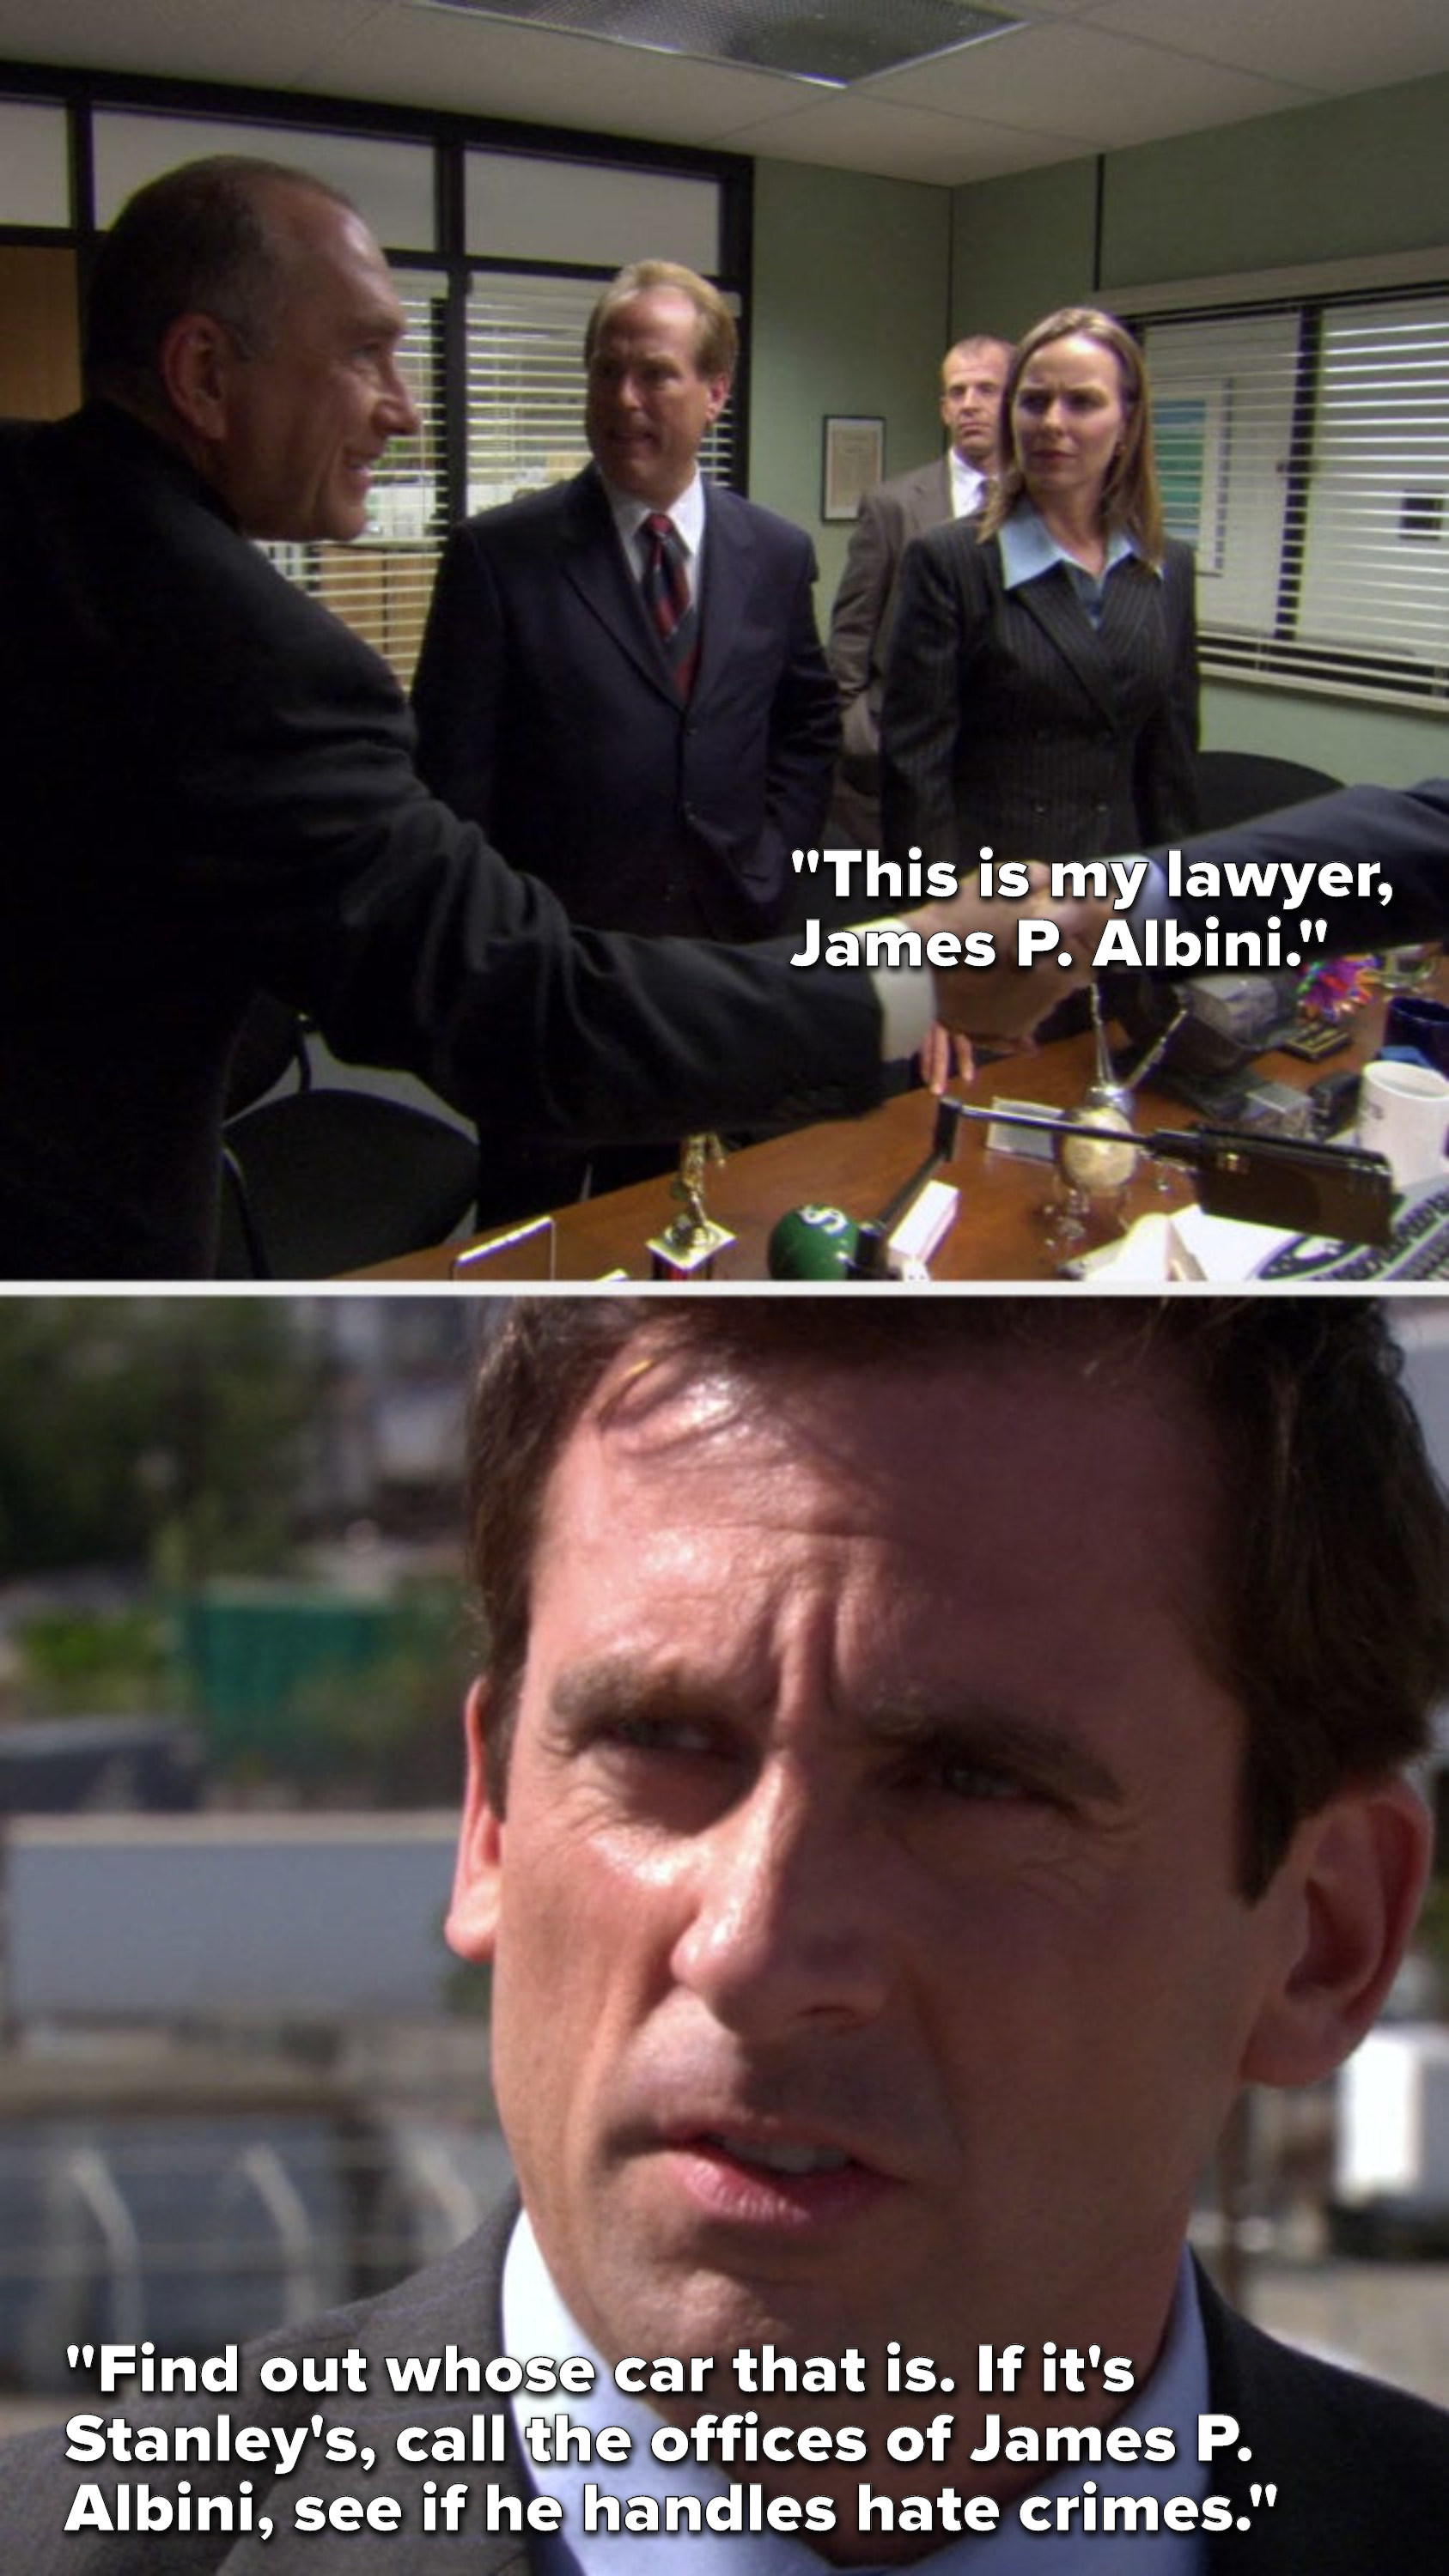 Michael says, &quot;This is my lawyer, James P Albini,&quot; then in Season 3 he says, &quot;Find out whose car that is, if it&#x27;s Stanley&#x27;s, call the offices of James P Albini, see if he handles hate crimes&quot;